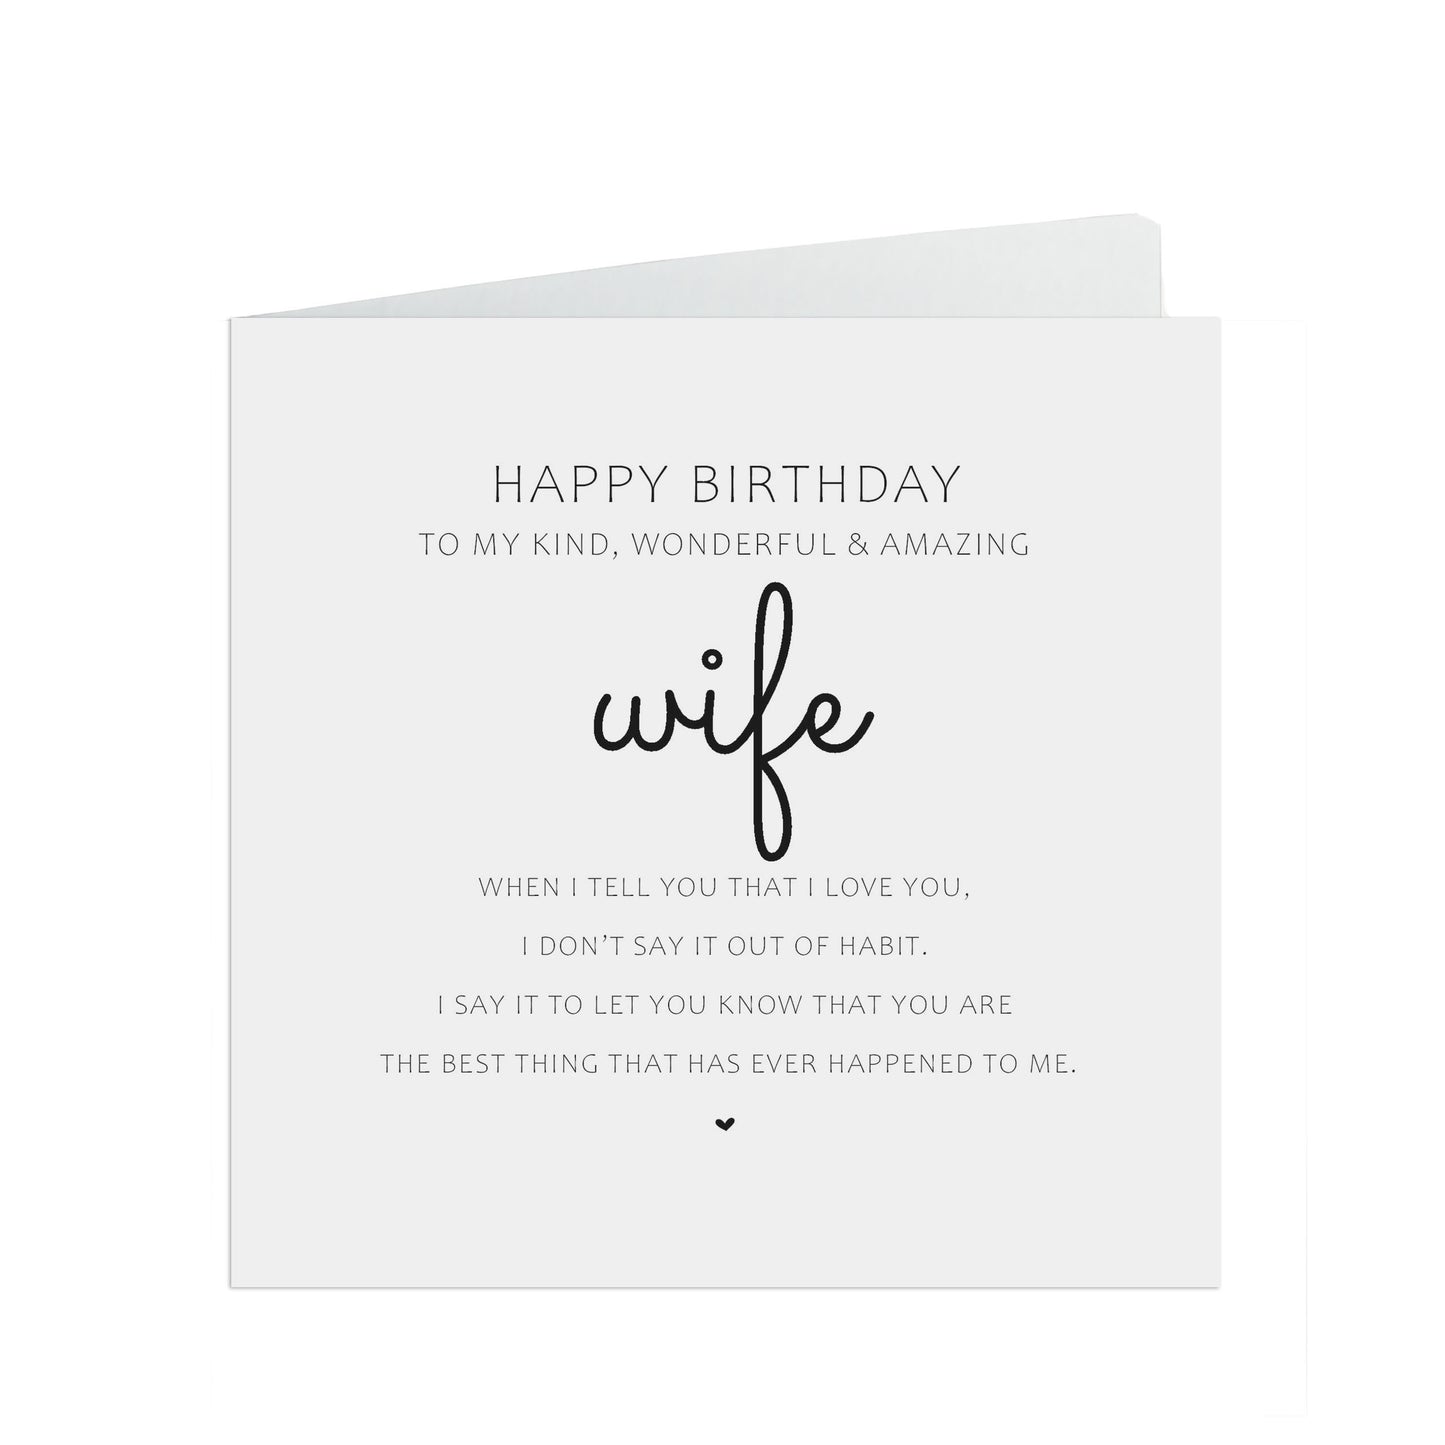 Wife Birthday Card, Best Thing That Ever Happened To Me, Simple Elegant Design